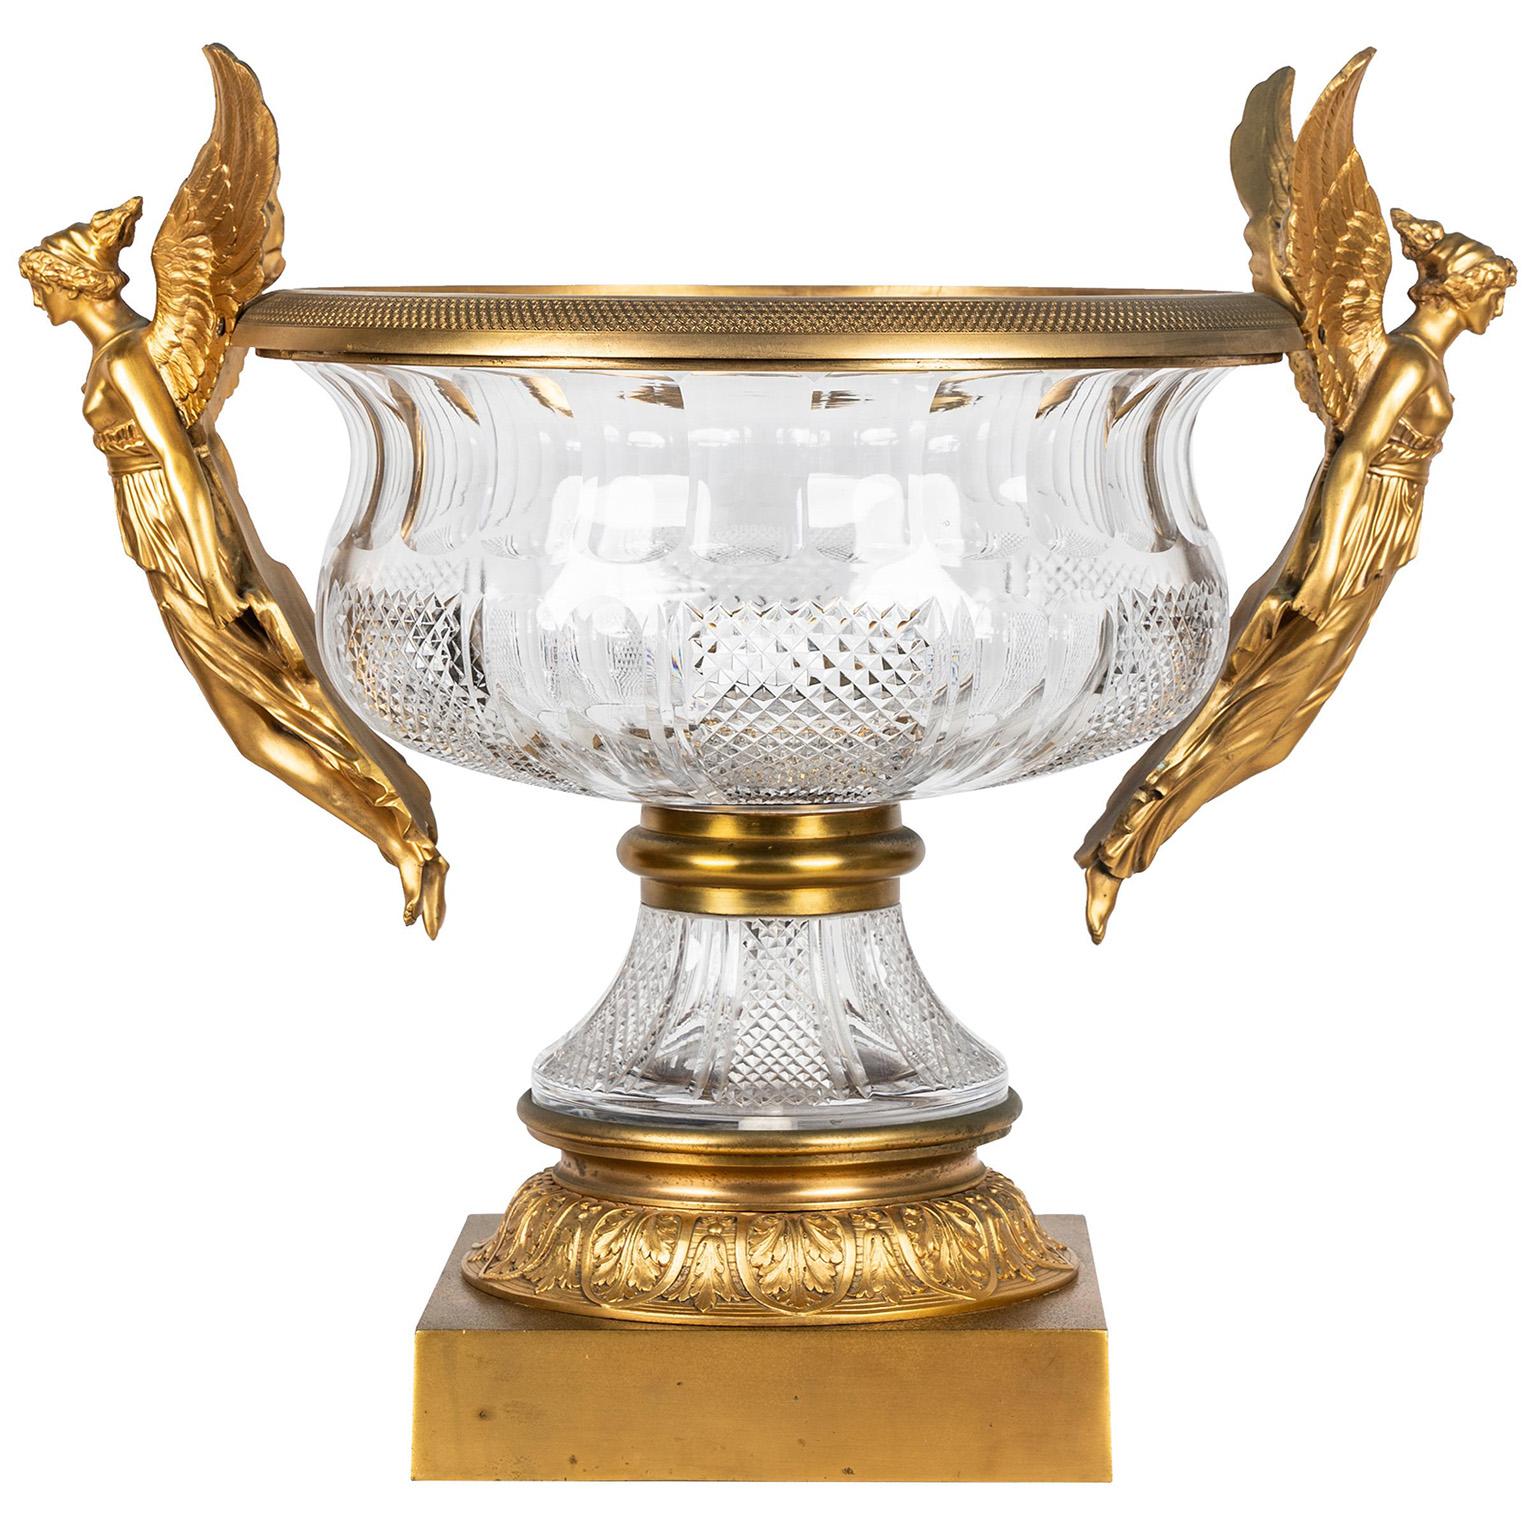 A Large and Impressive French Empire Revival Style Gilt-Bronze and Cut-Glass 'Grande Coupe' Figural Urn Centerpiece, in the manner of Baccarat, the mounts in the manner of and after Pierre-Philippe Thomire (French, 1751-1843). The two-part ovoid